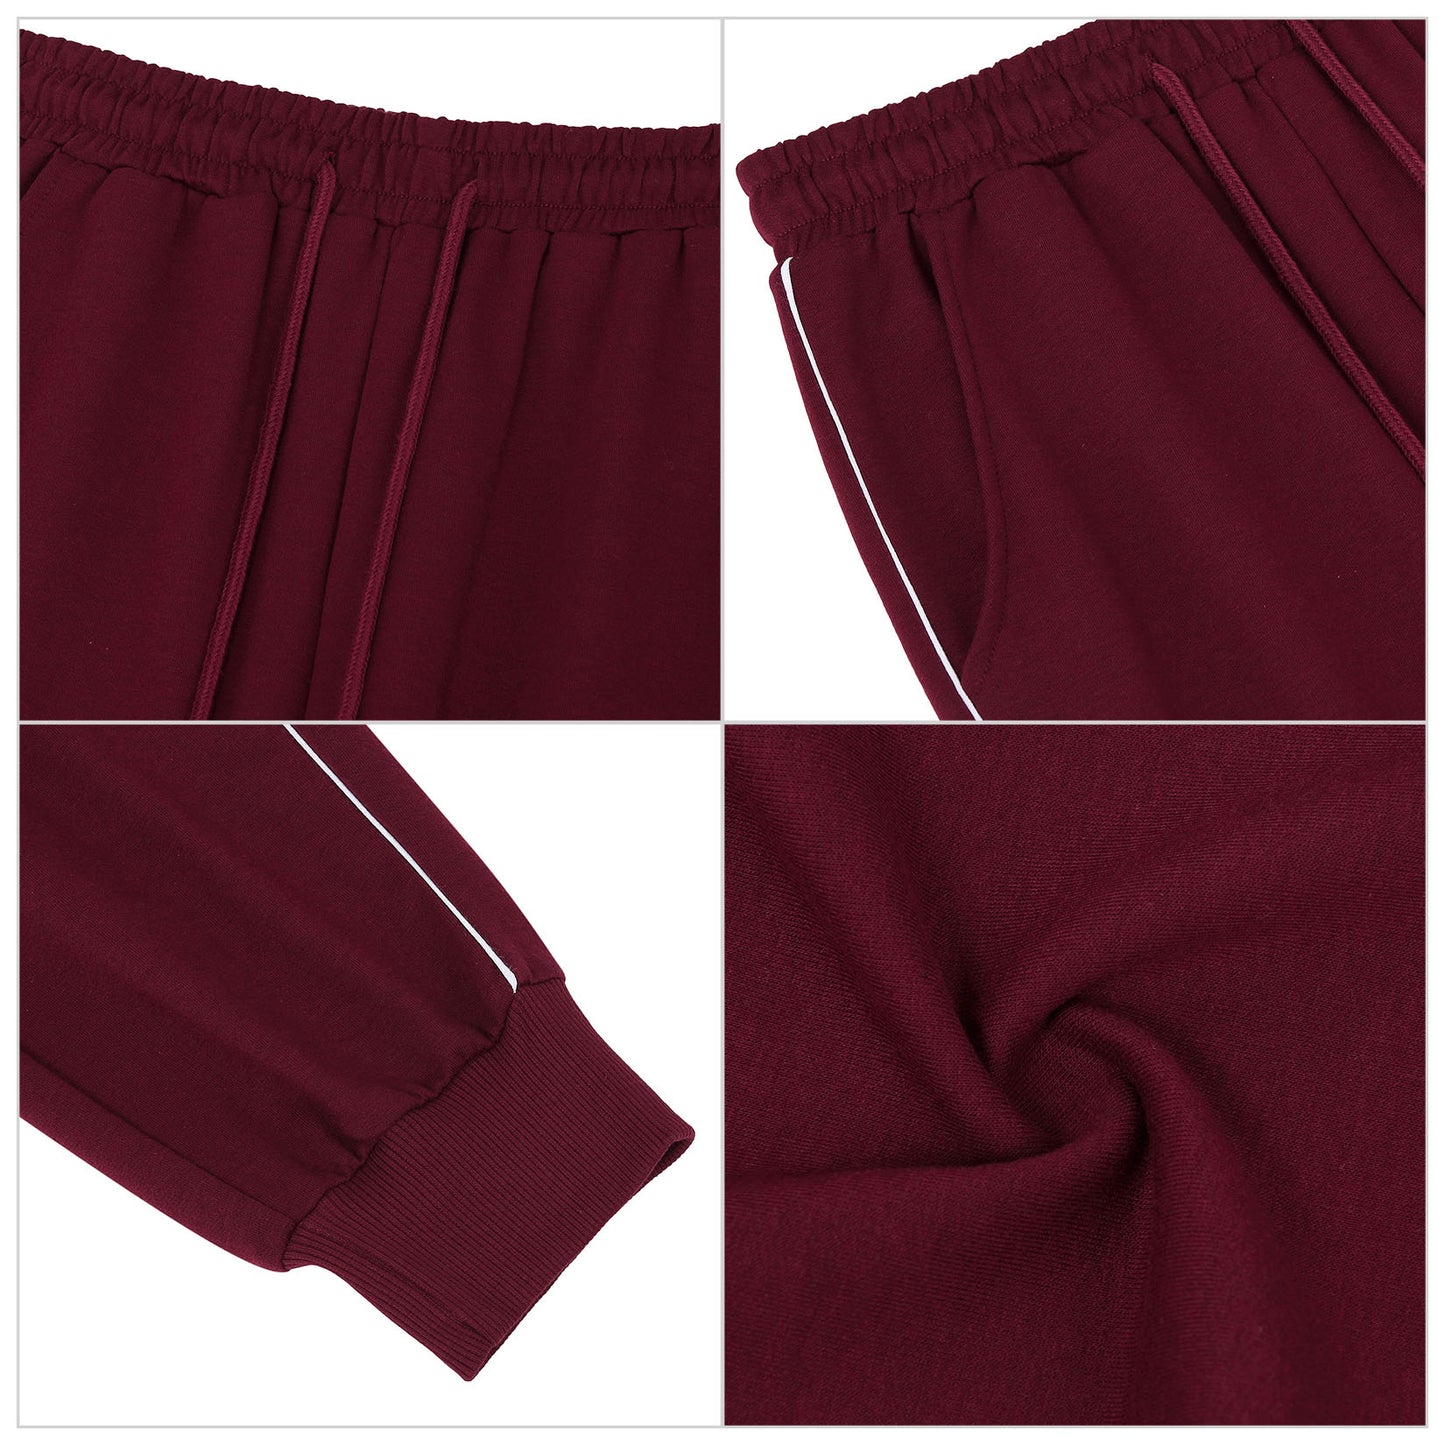 YESFASHION Women's Drawing Pockets Casual Sports Pants Wine Red